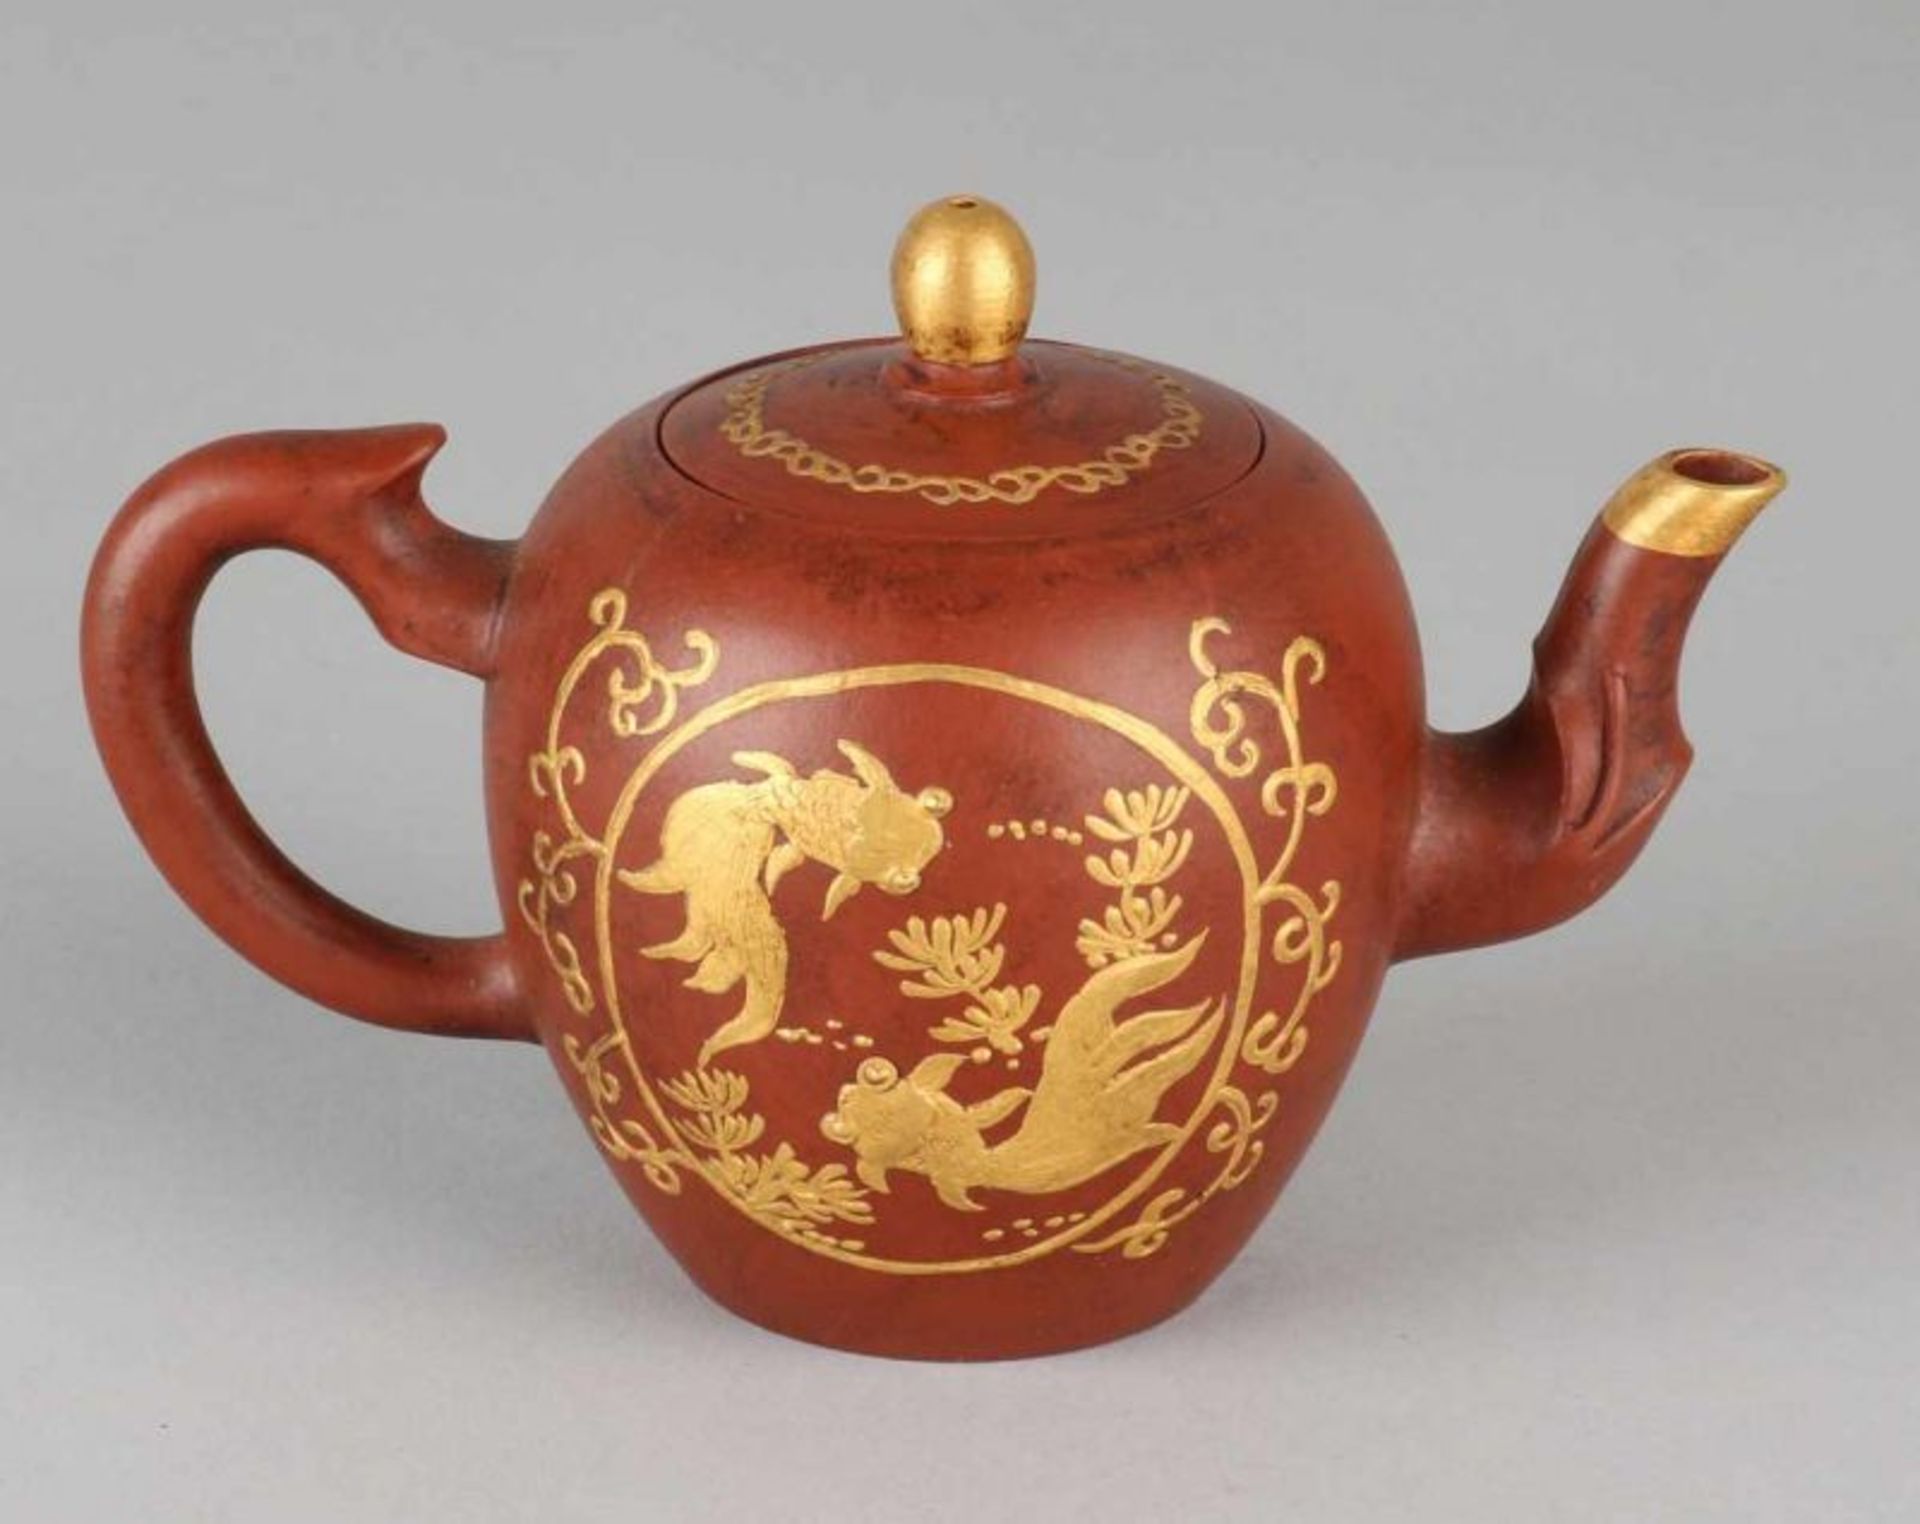 Old / antique Chinese Yixing teapot with golden veil fish decor. Bottom Brand. Size: 9 x 13 x 7 - Image 2 of 3